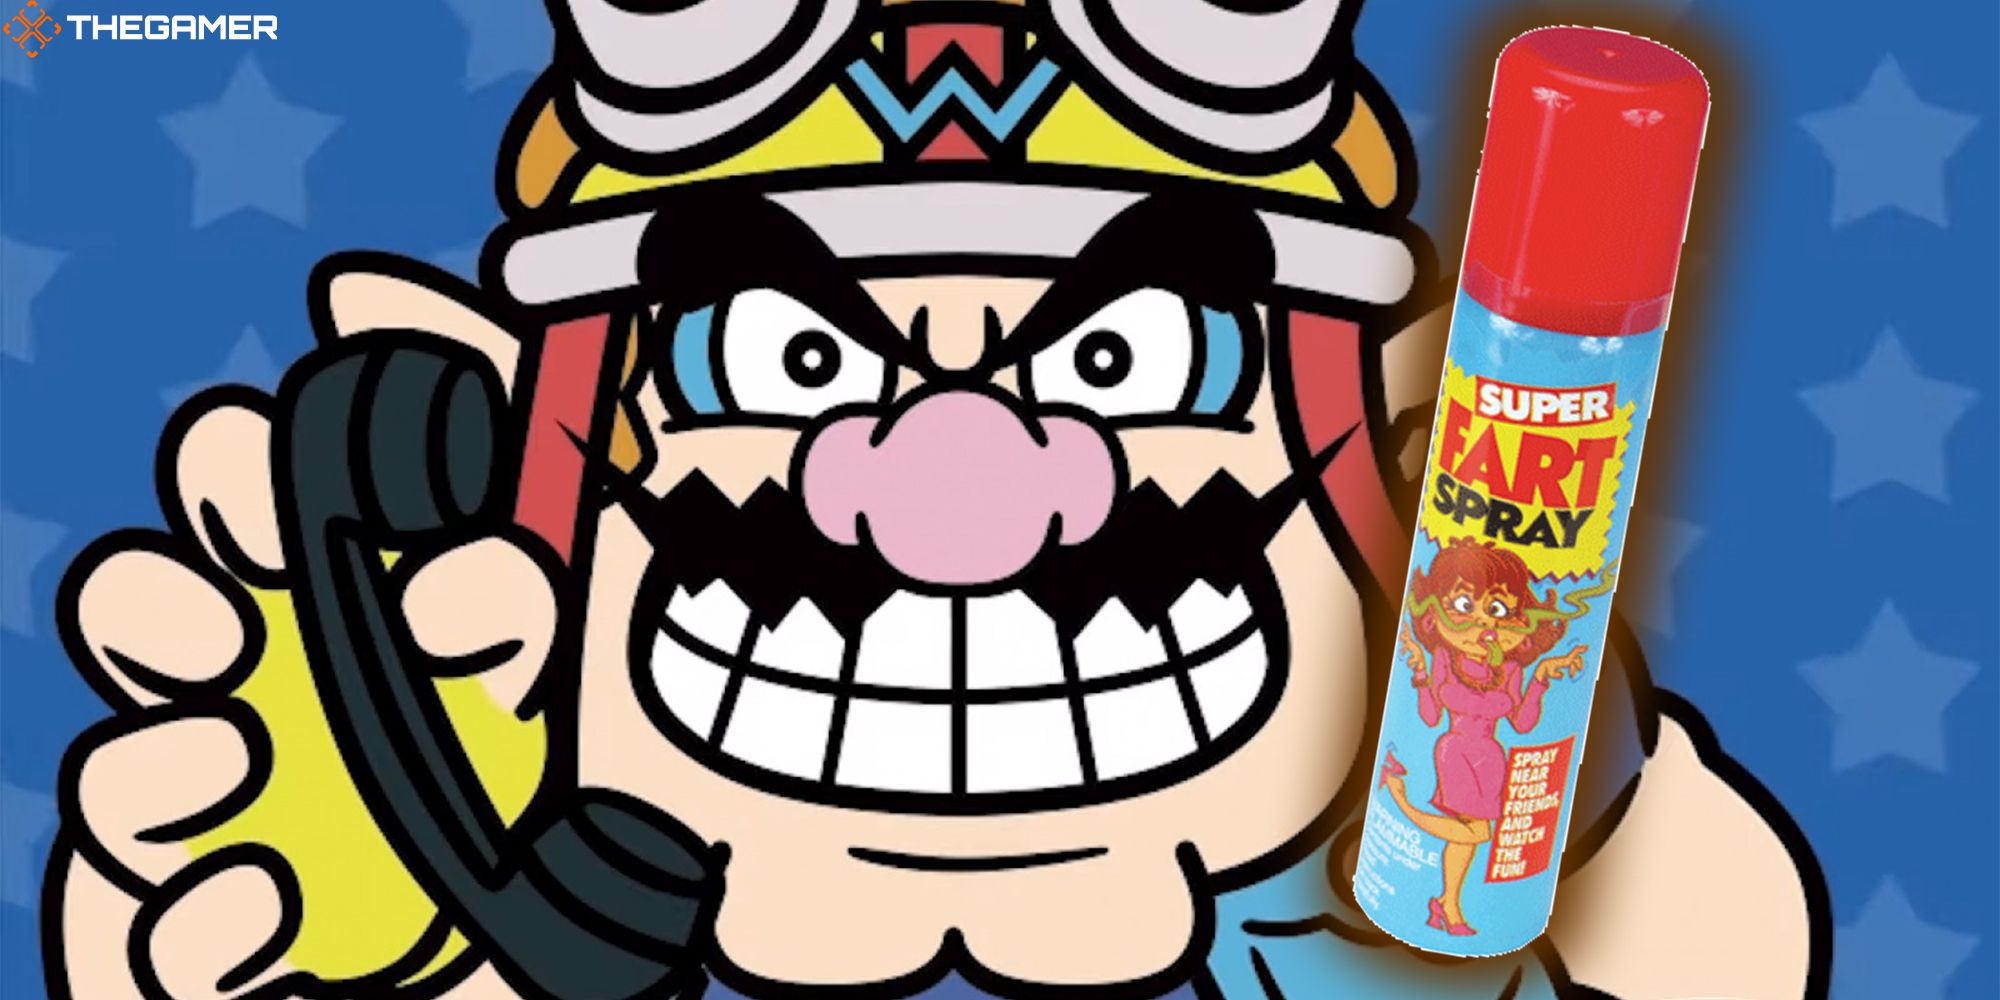 Wario holds a telephone in one hand and a can of fart spray in the other. Custom image for TG.